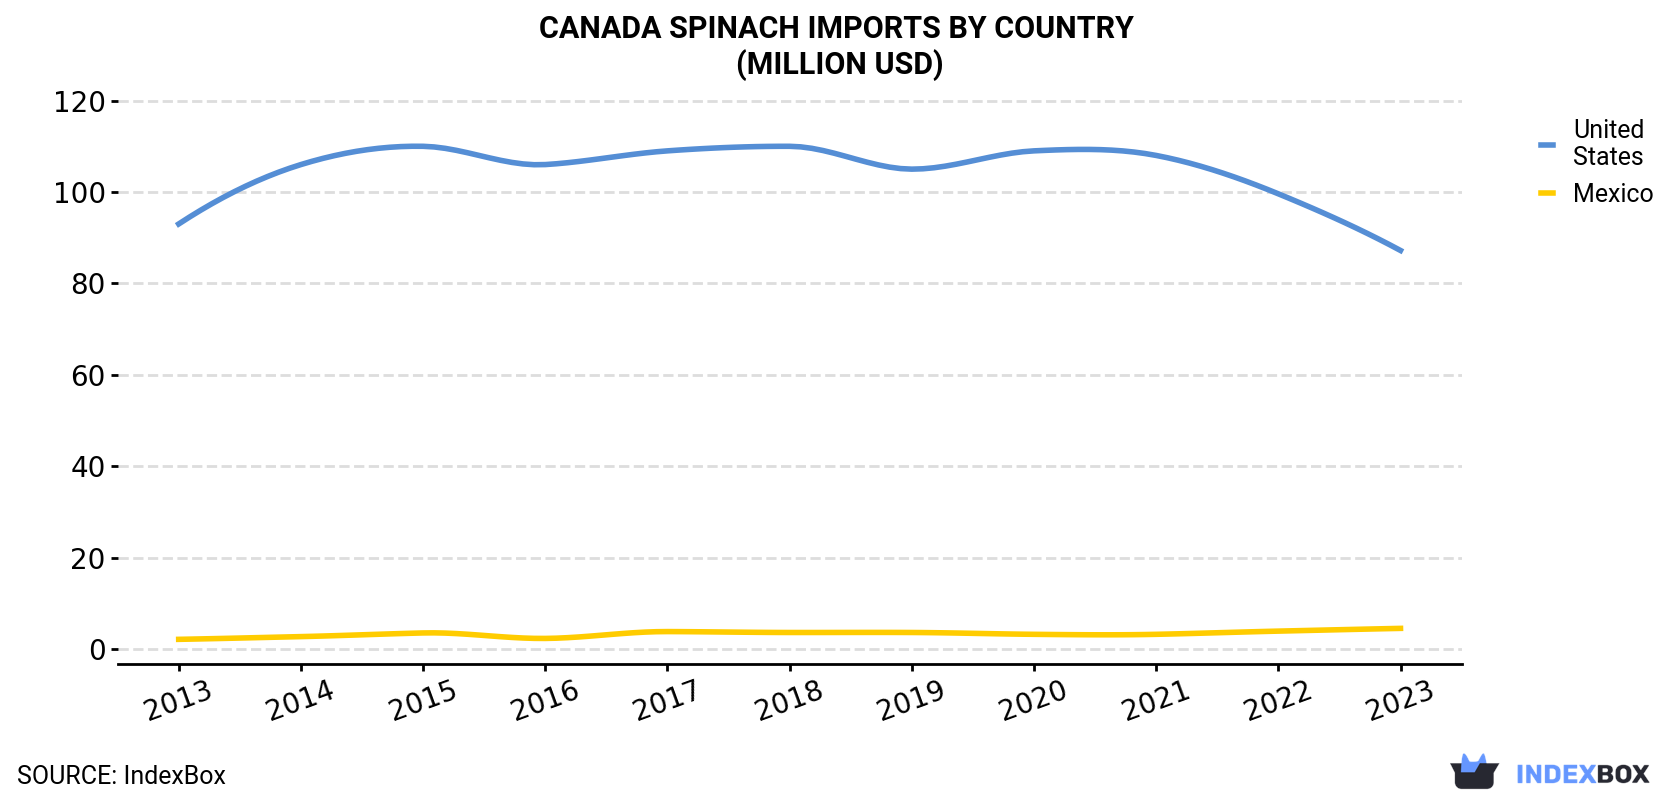 Canada Spinach Imports By Country (Million USD)